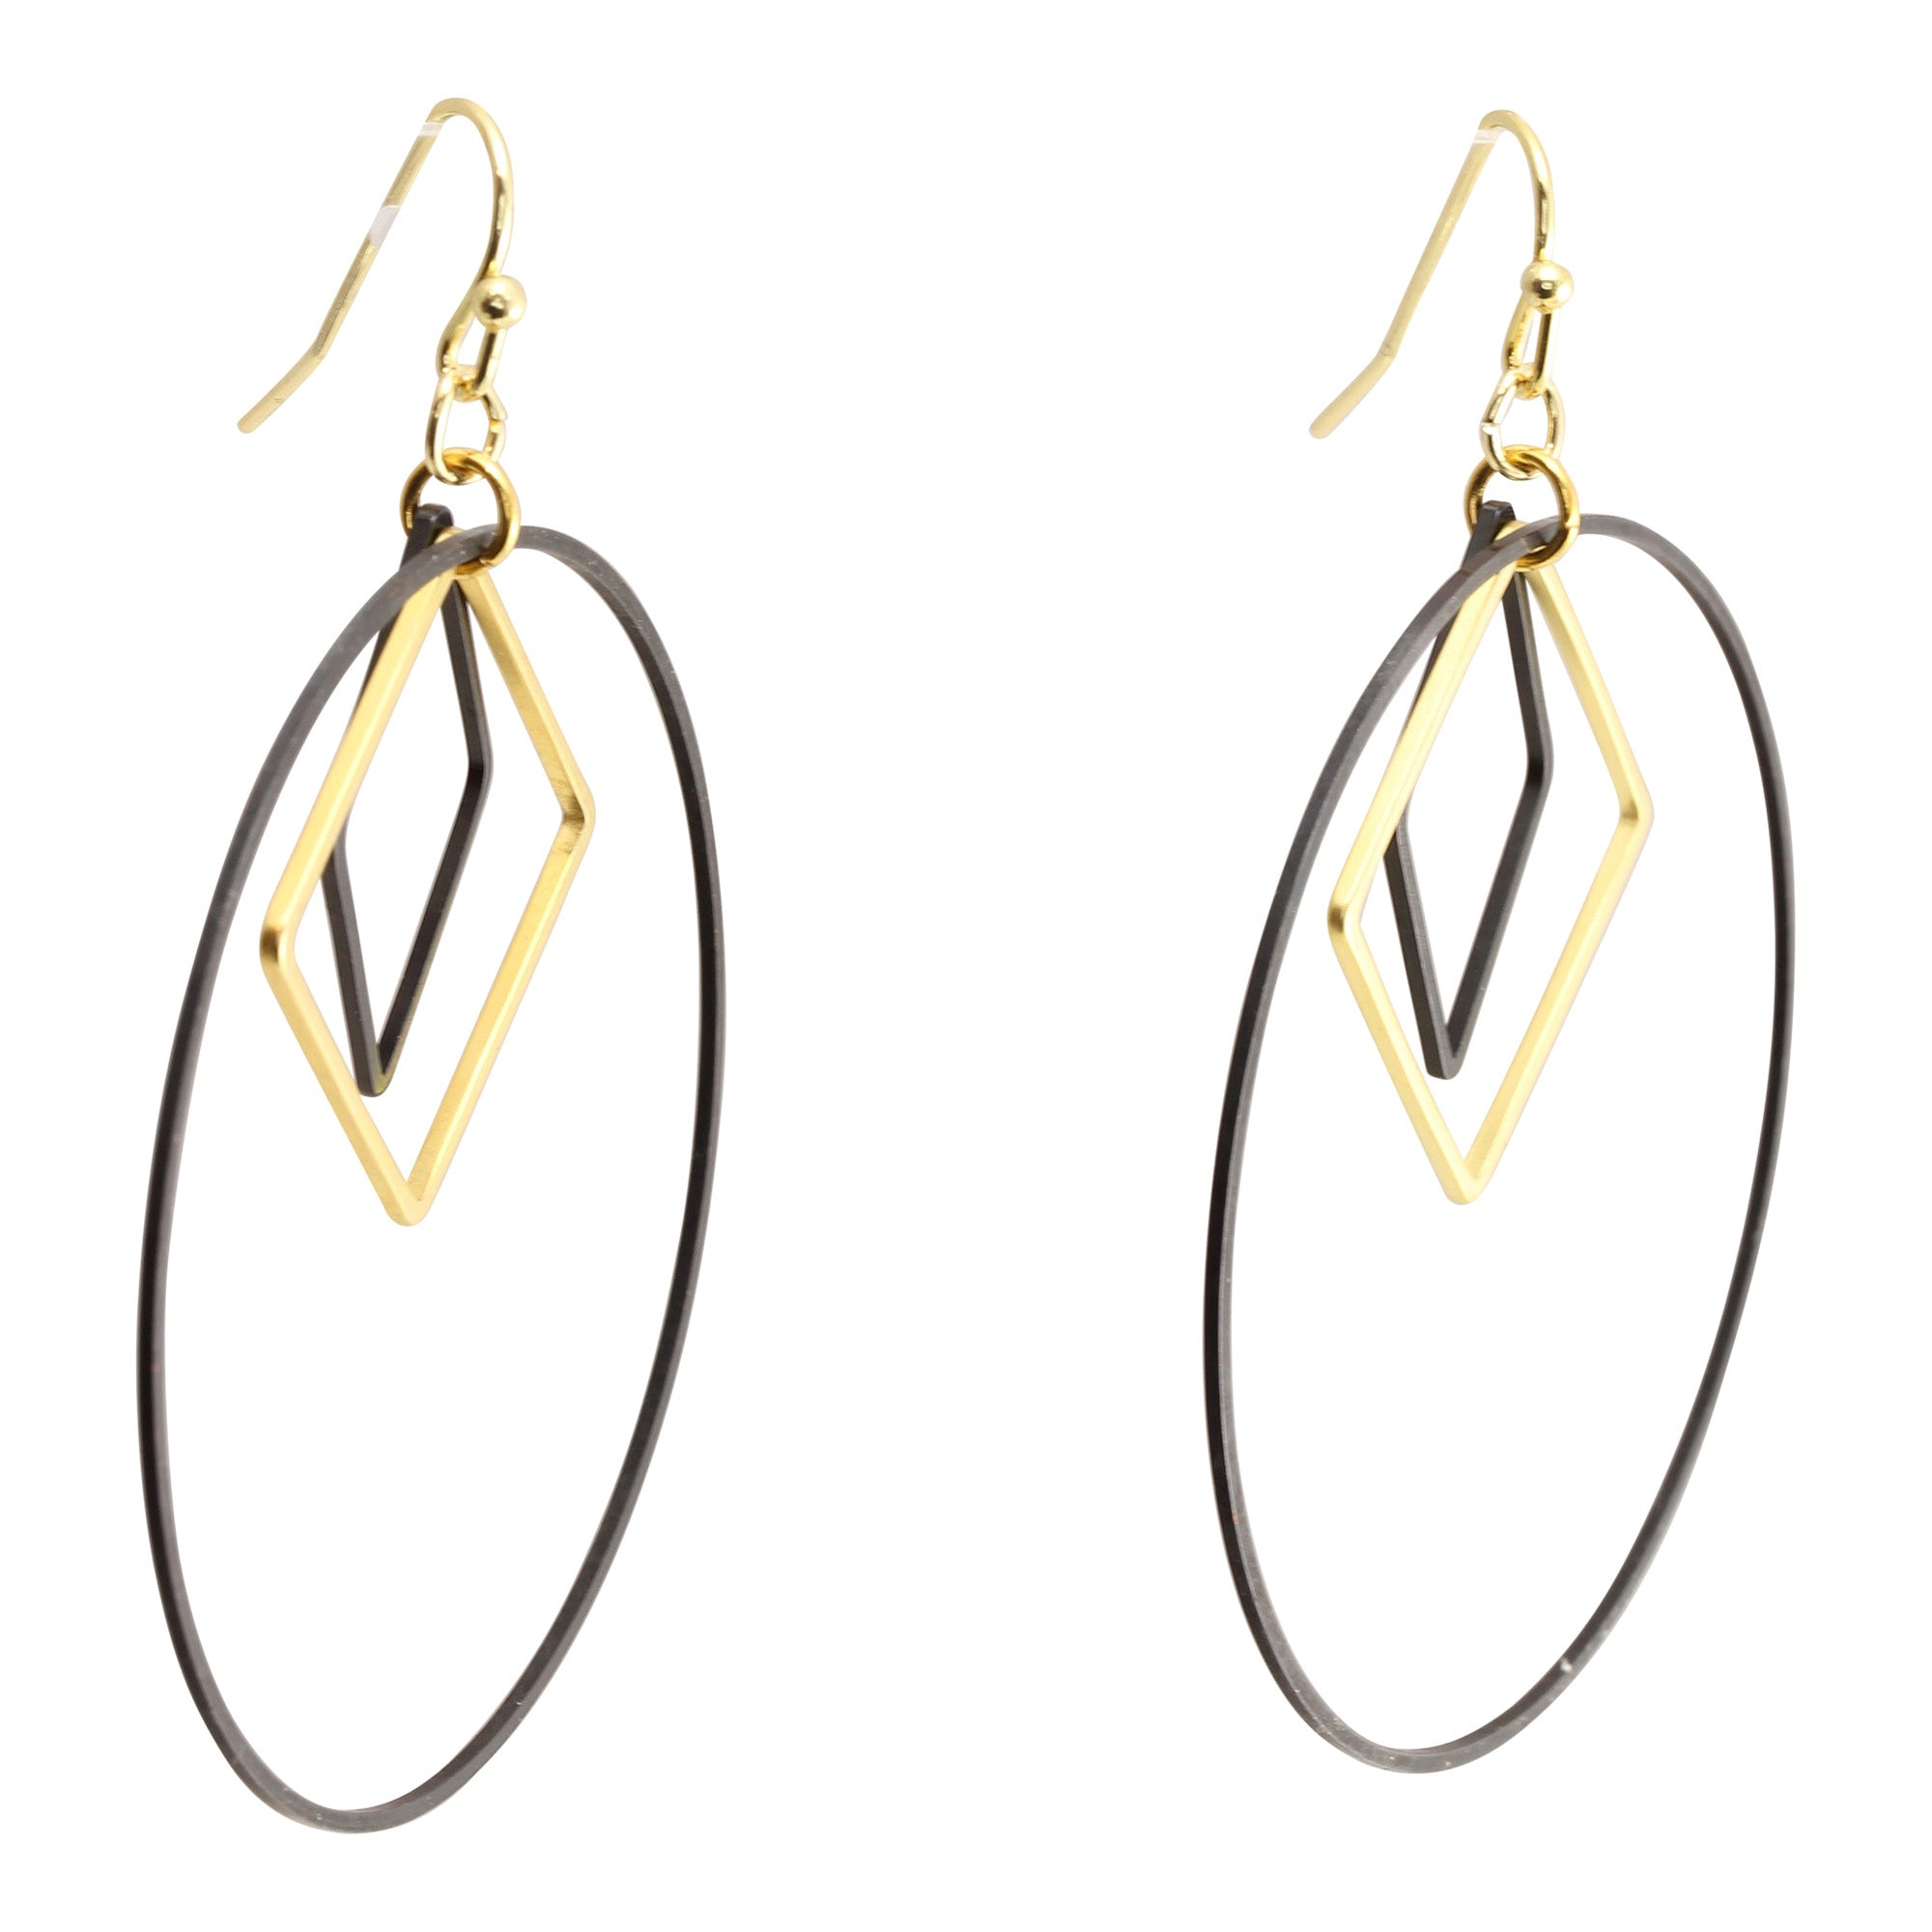 "Le Contour" Large Luxe Hoops in Matte Black & Gold